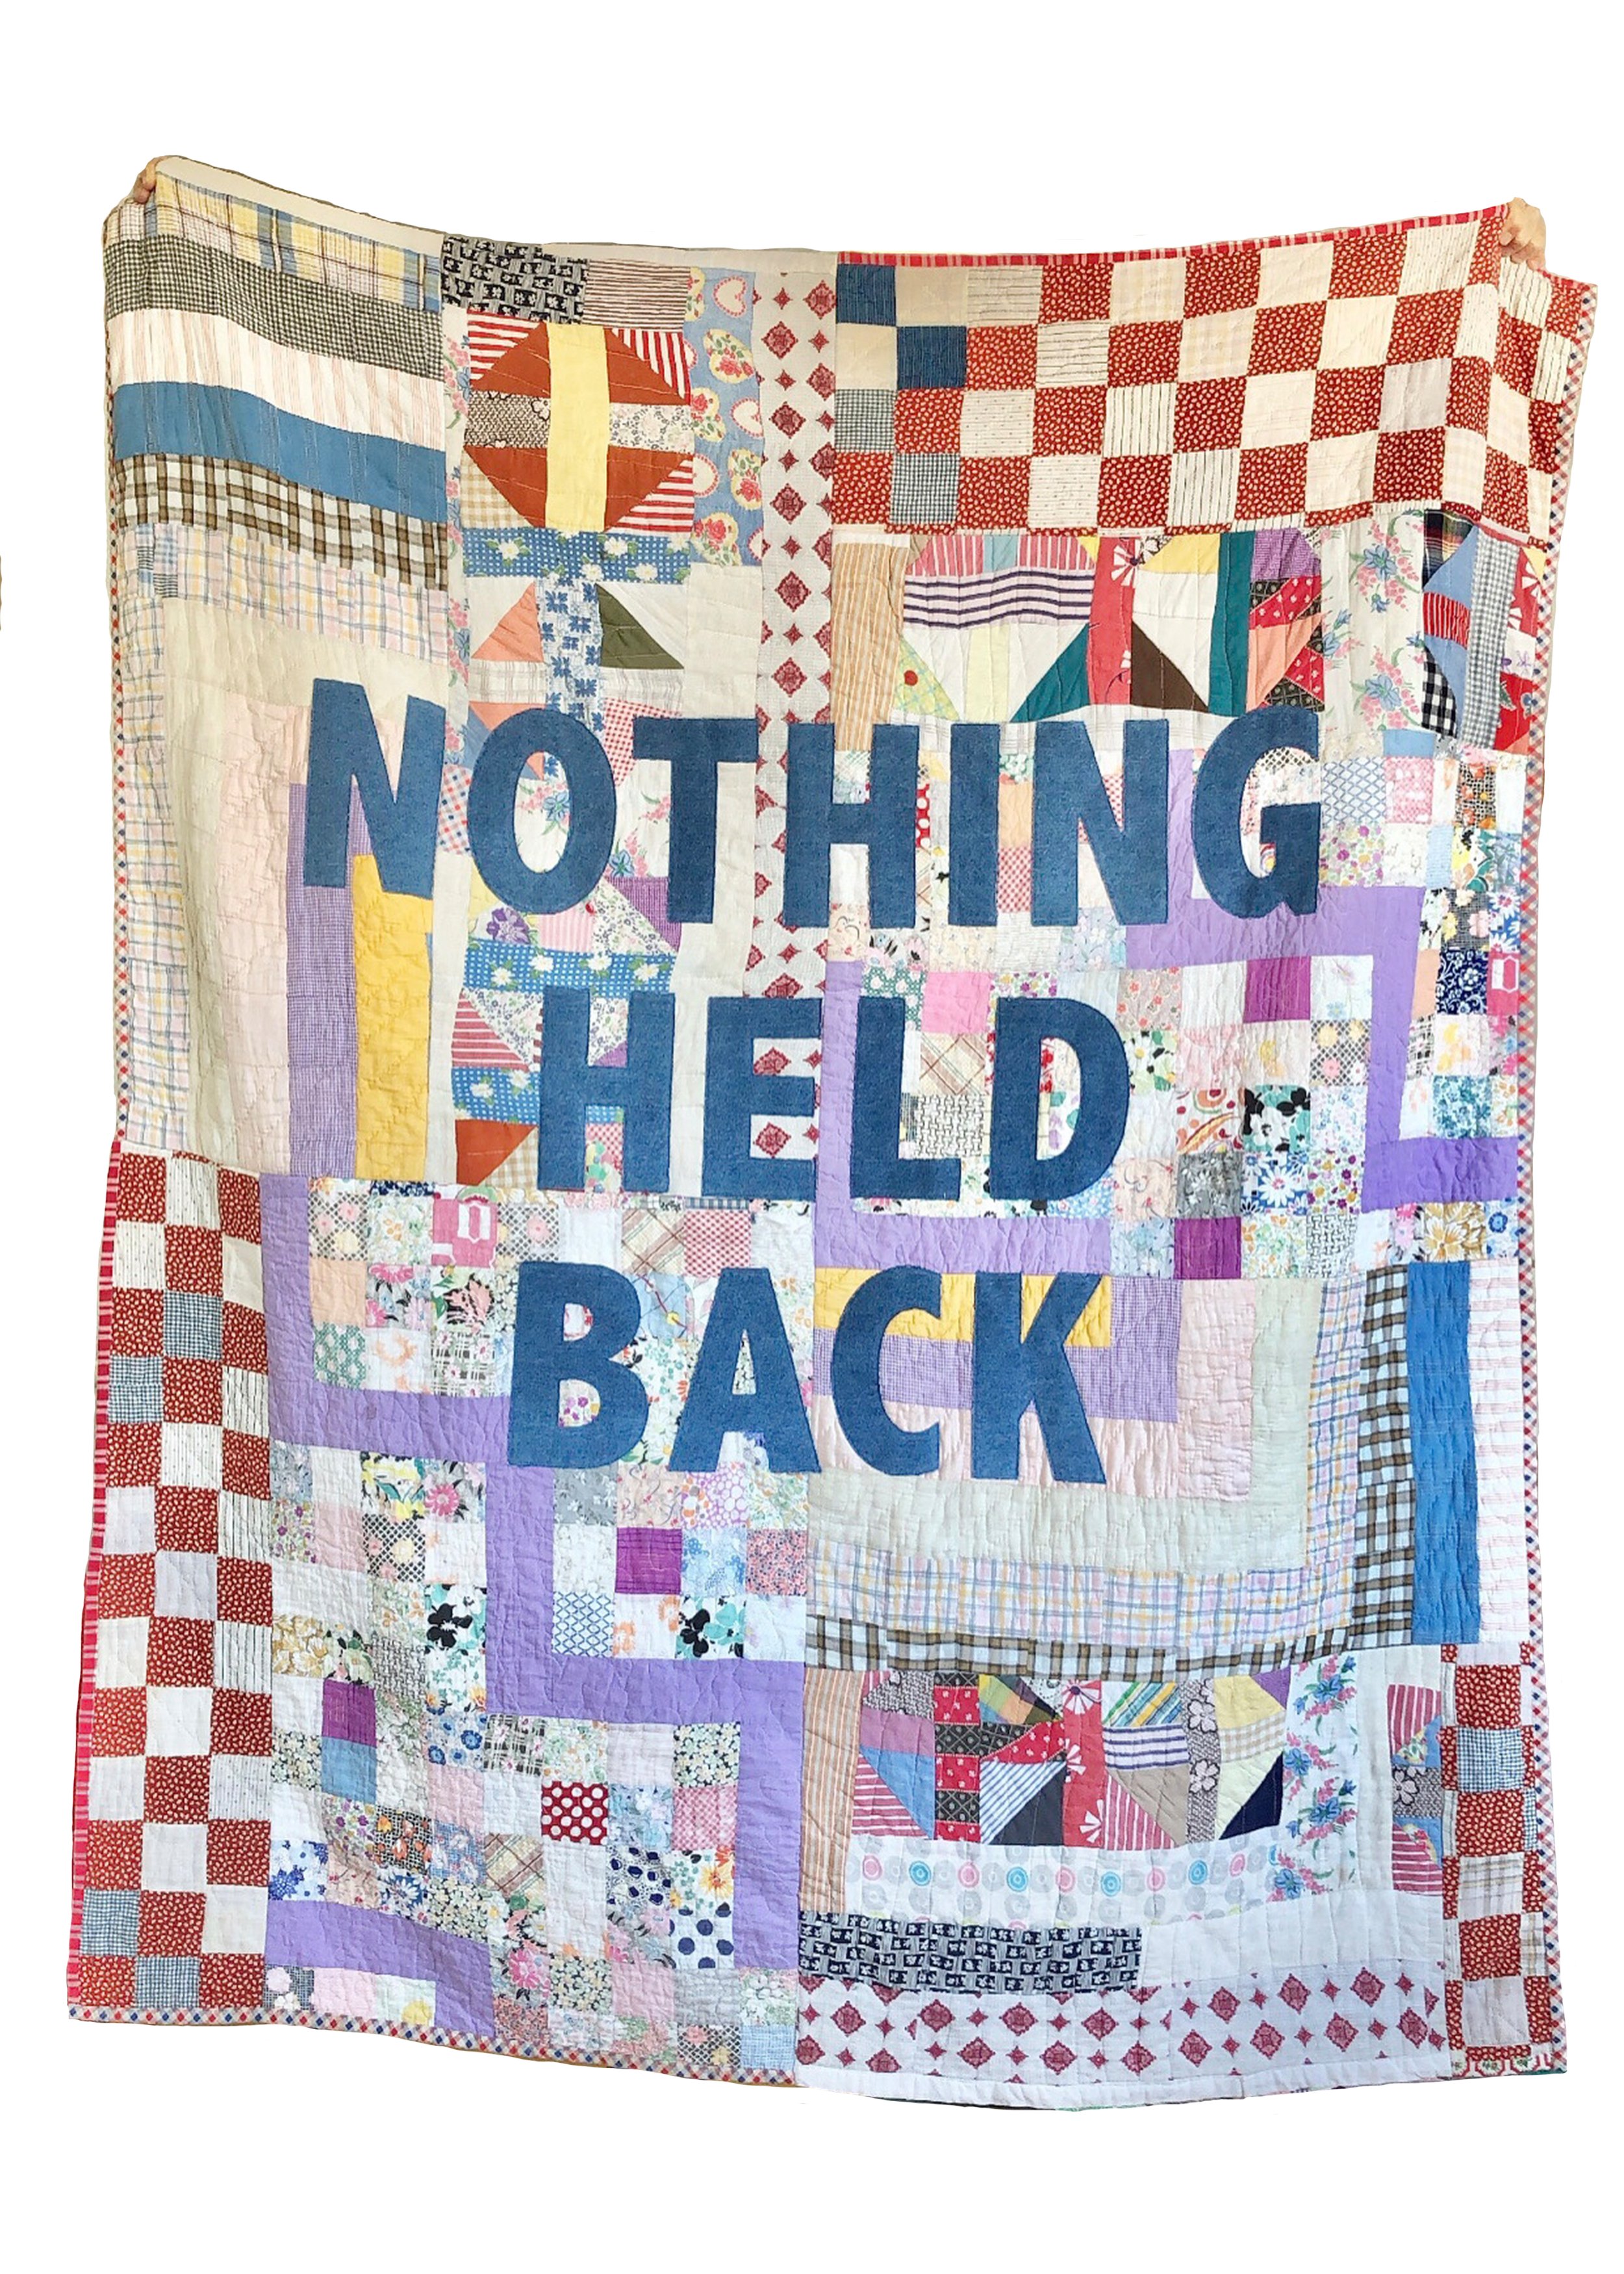  mended and collaged parts of 4 quilts, denim letters, vintage fabric edging, 2021,  available  (email for details: floraewilds@gmail.com) 